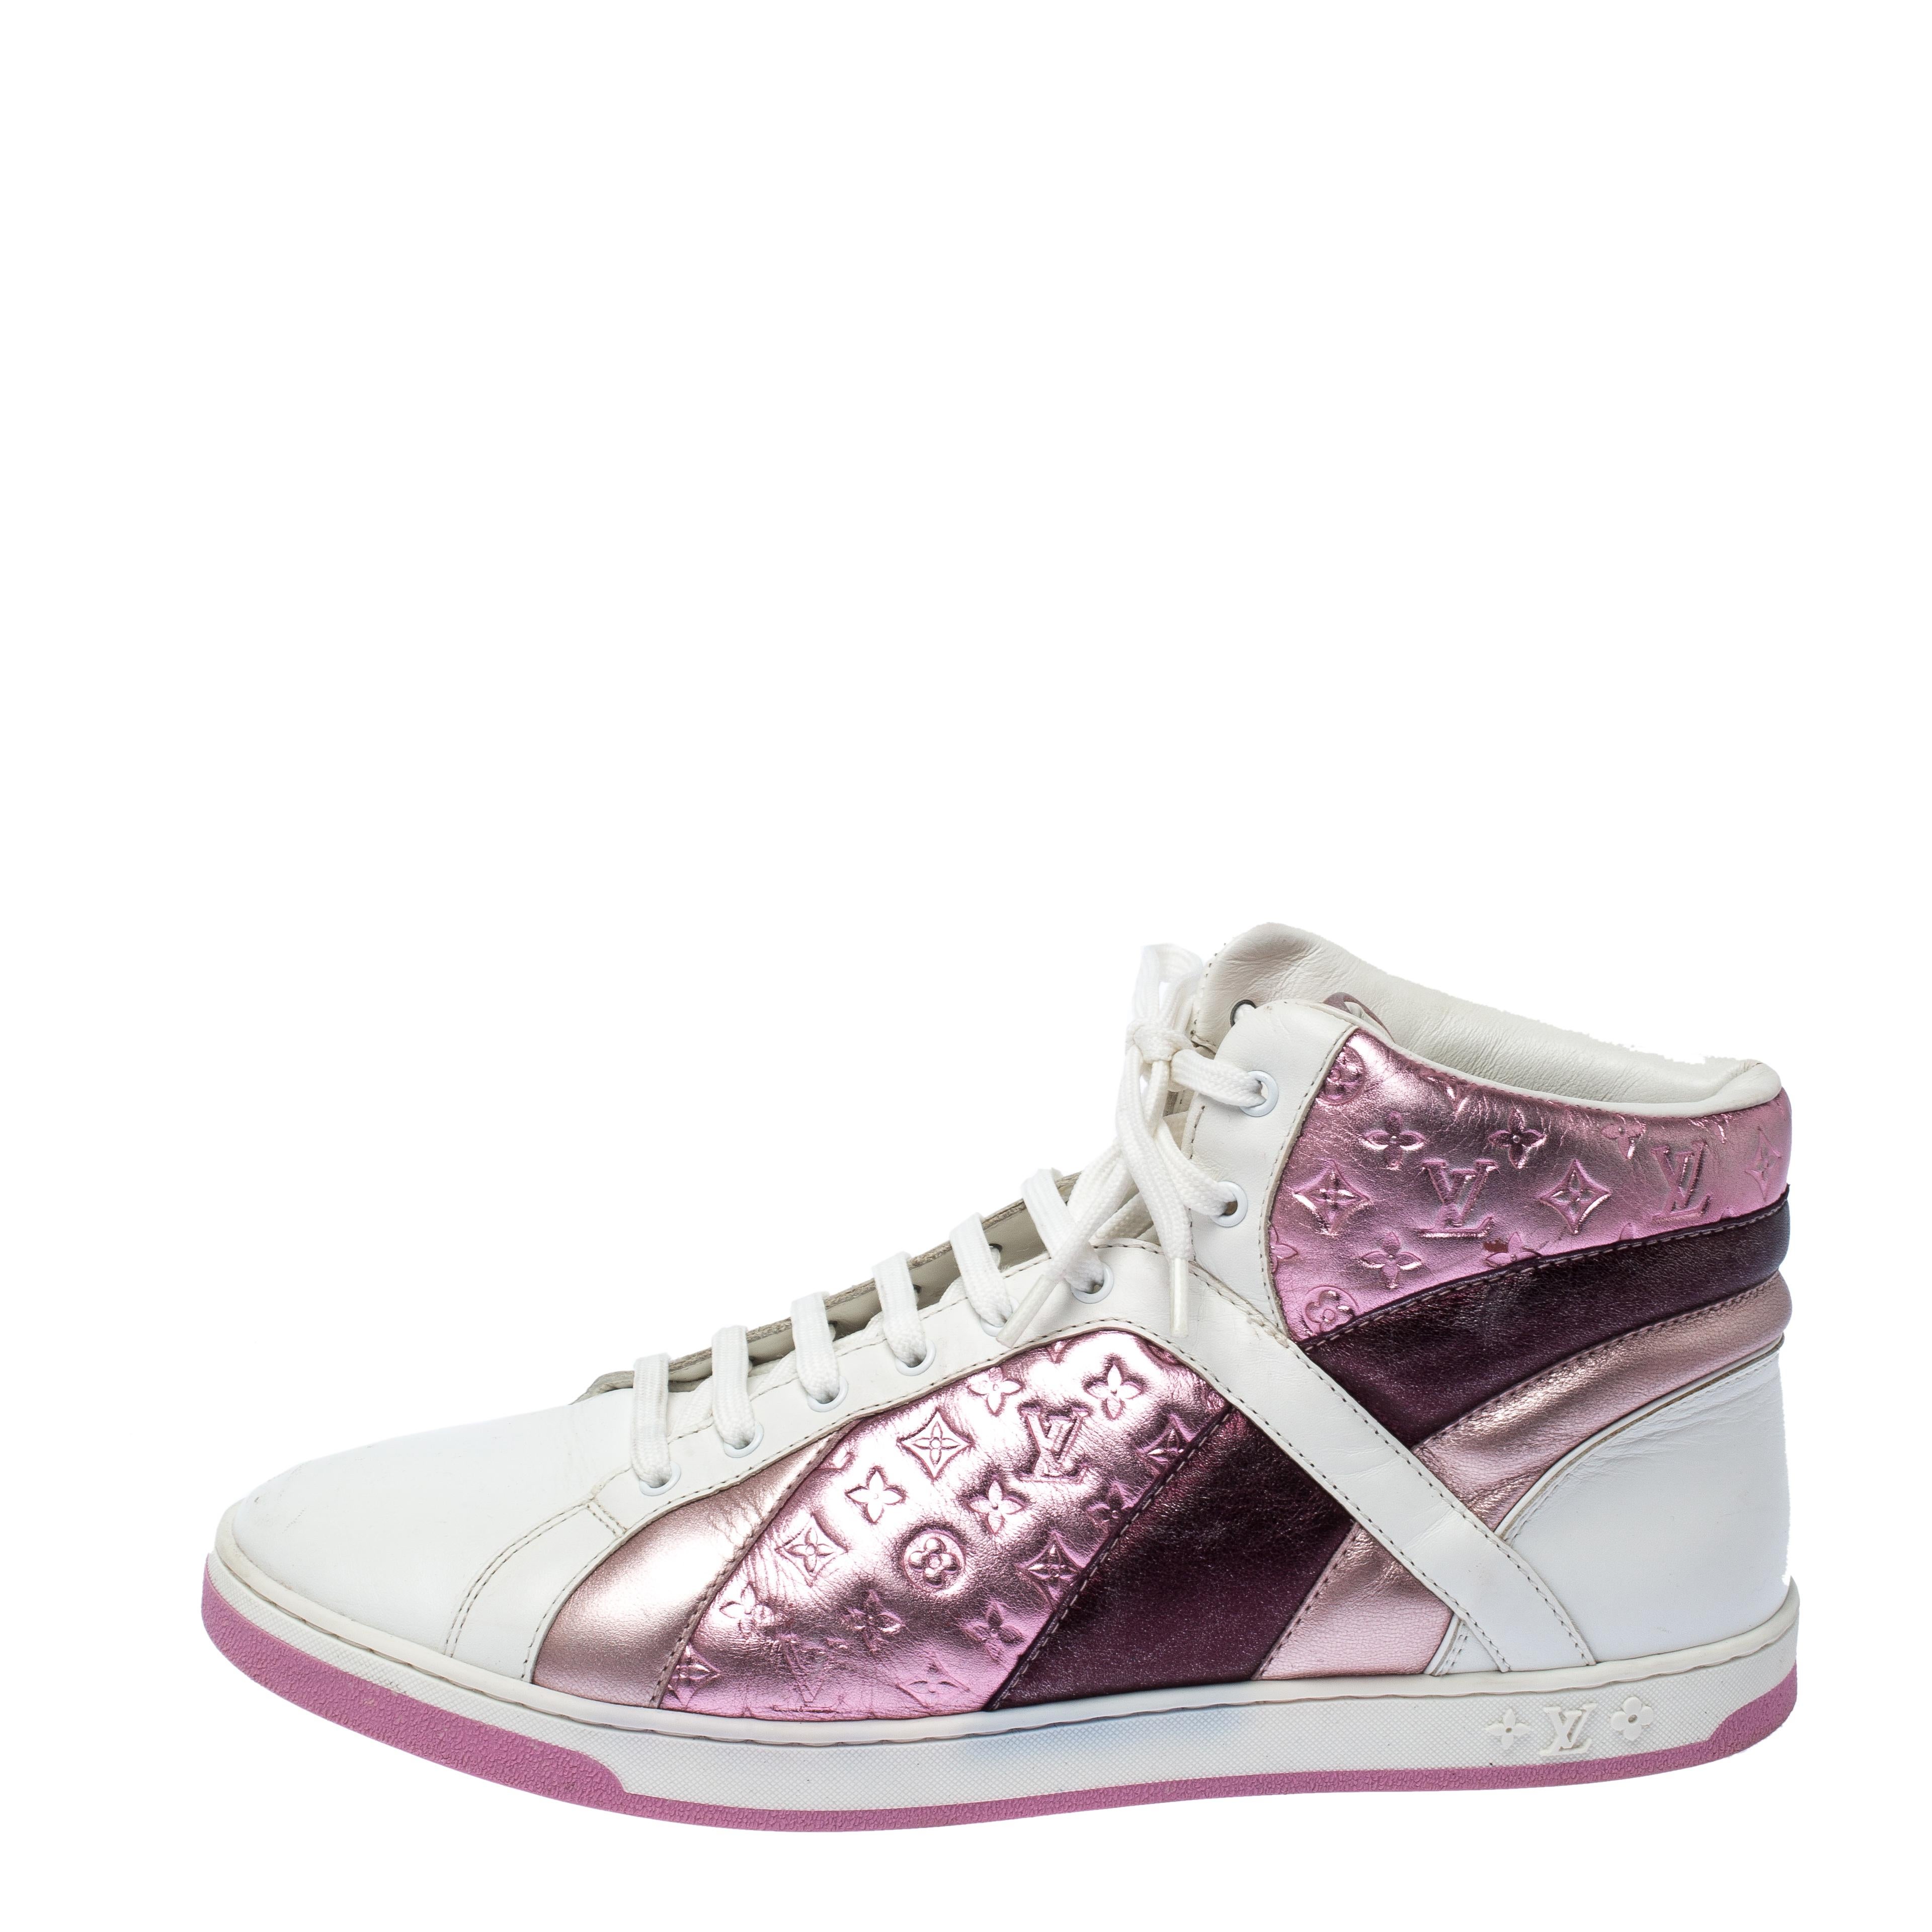 Feel great in your casual wear every time you step out in these sneakers from Louis Vuitton. They've been crafted from leather and styled with monogram accents, simple lace-ups and rubber soles. The sneakers are filled with comfort and effortless